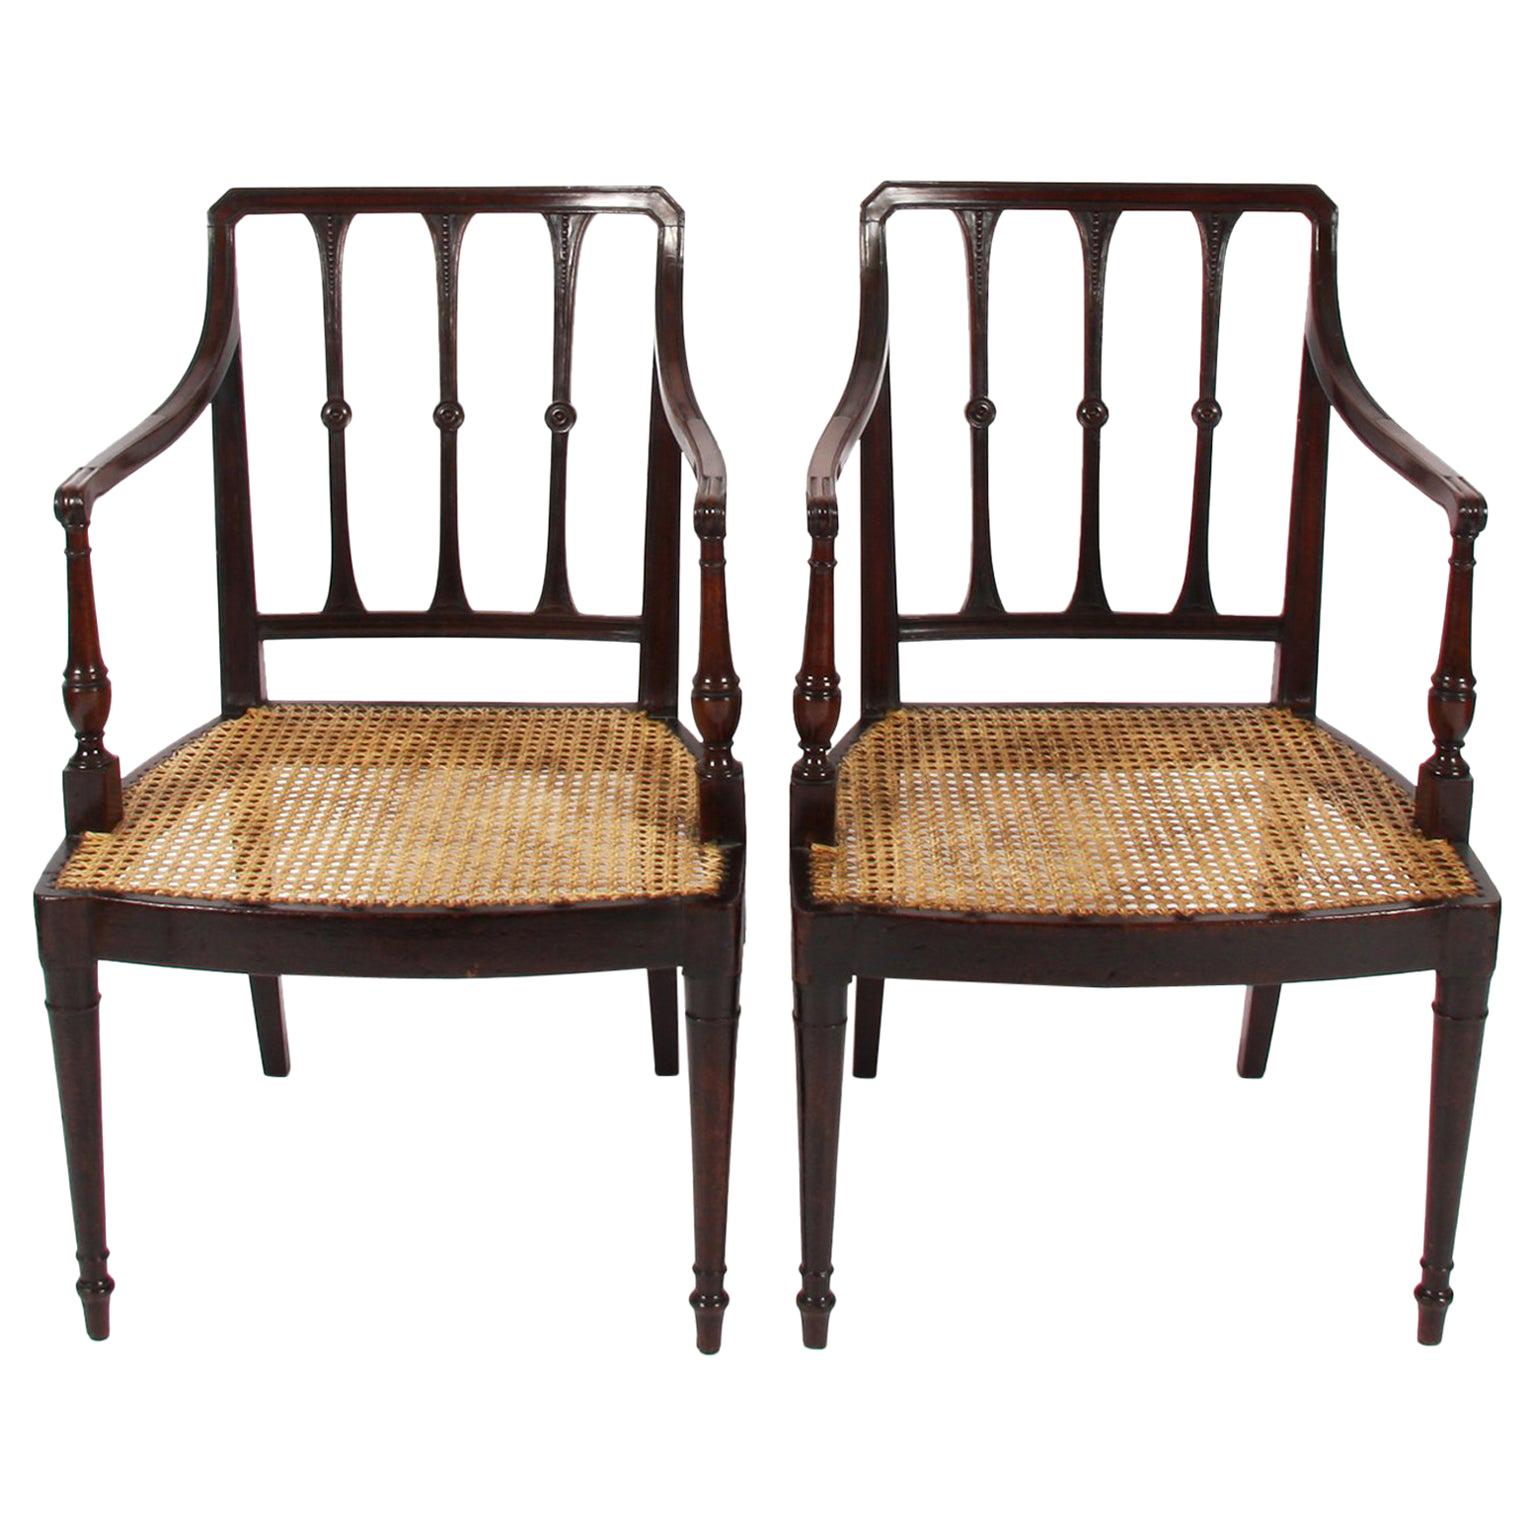 Pair of English Early 20th Century Caned Mahogany Chairs